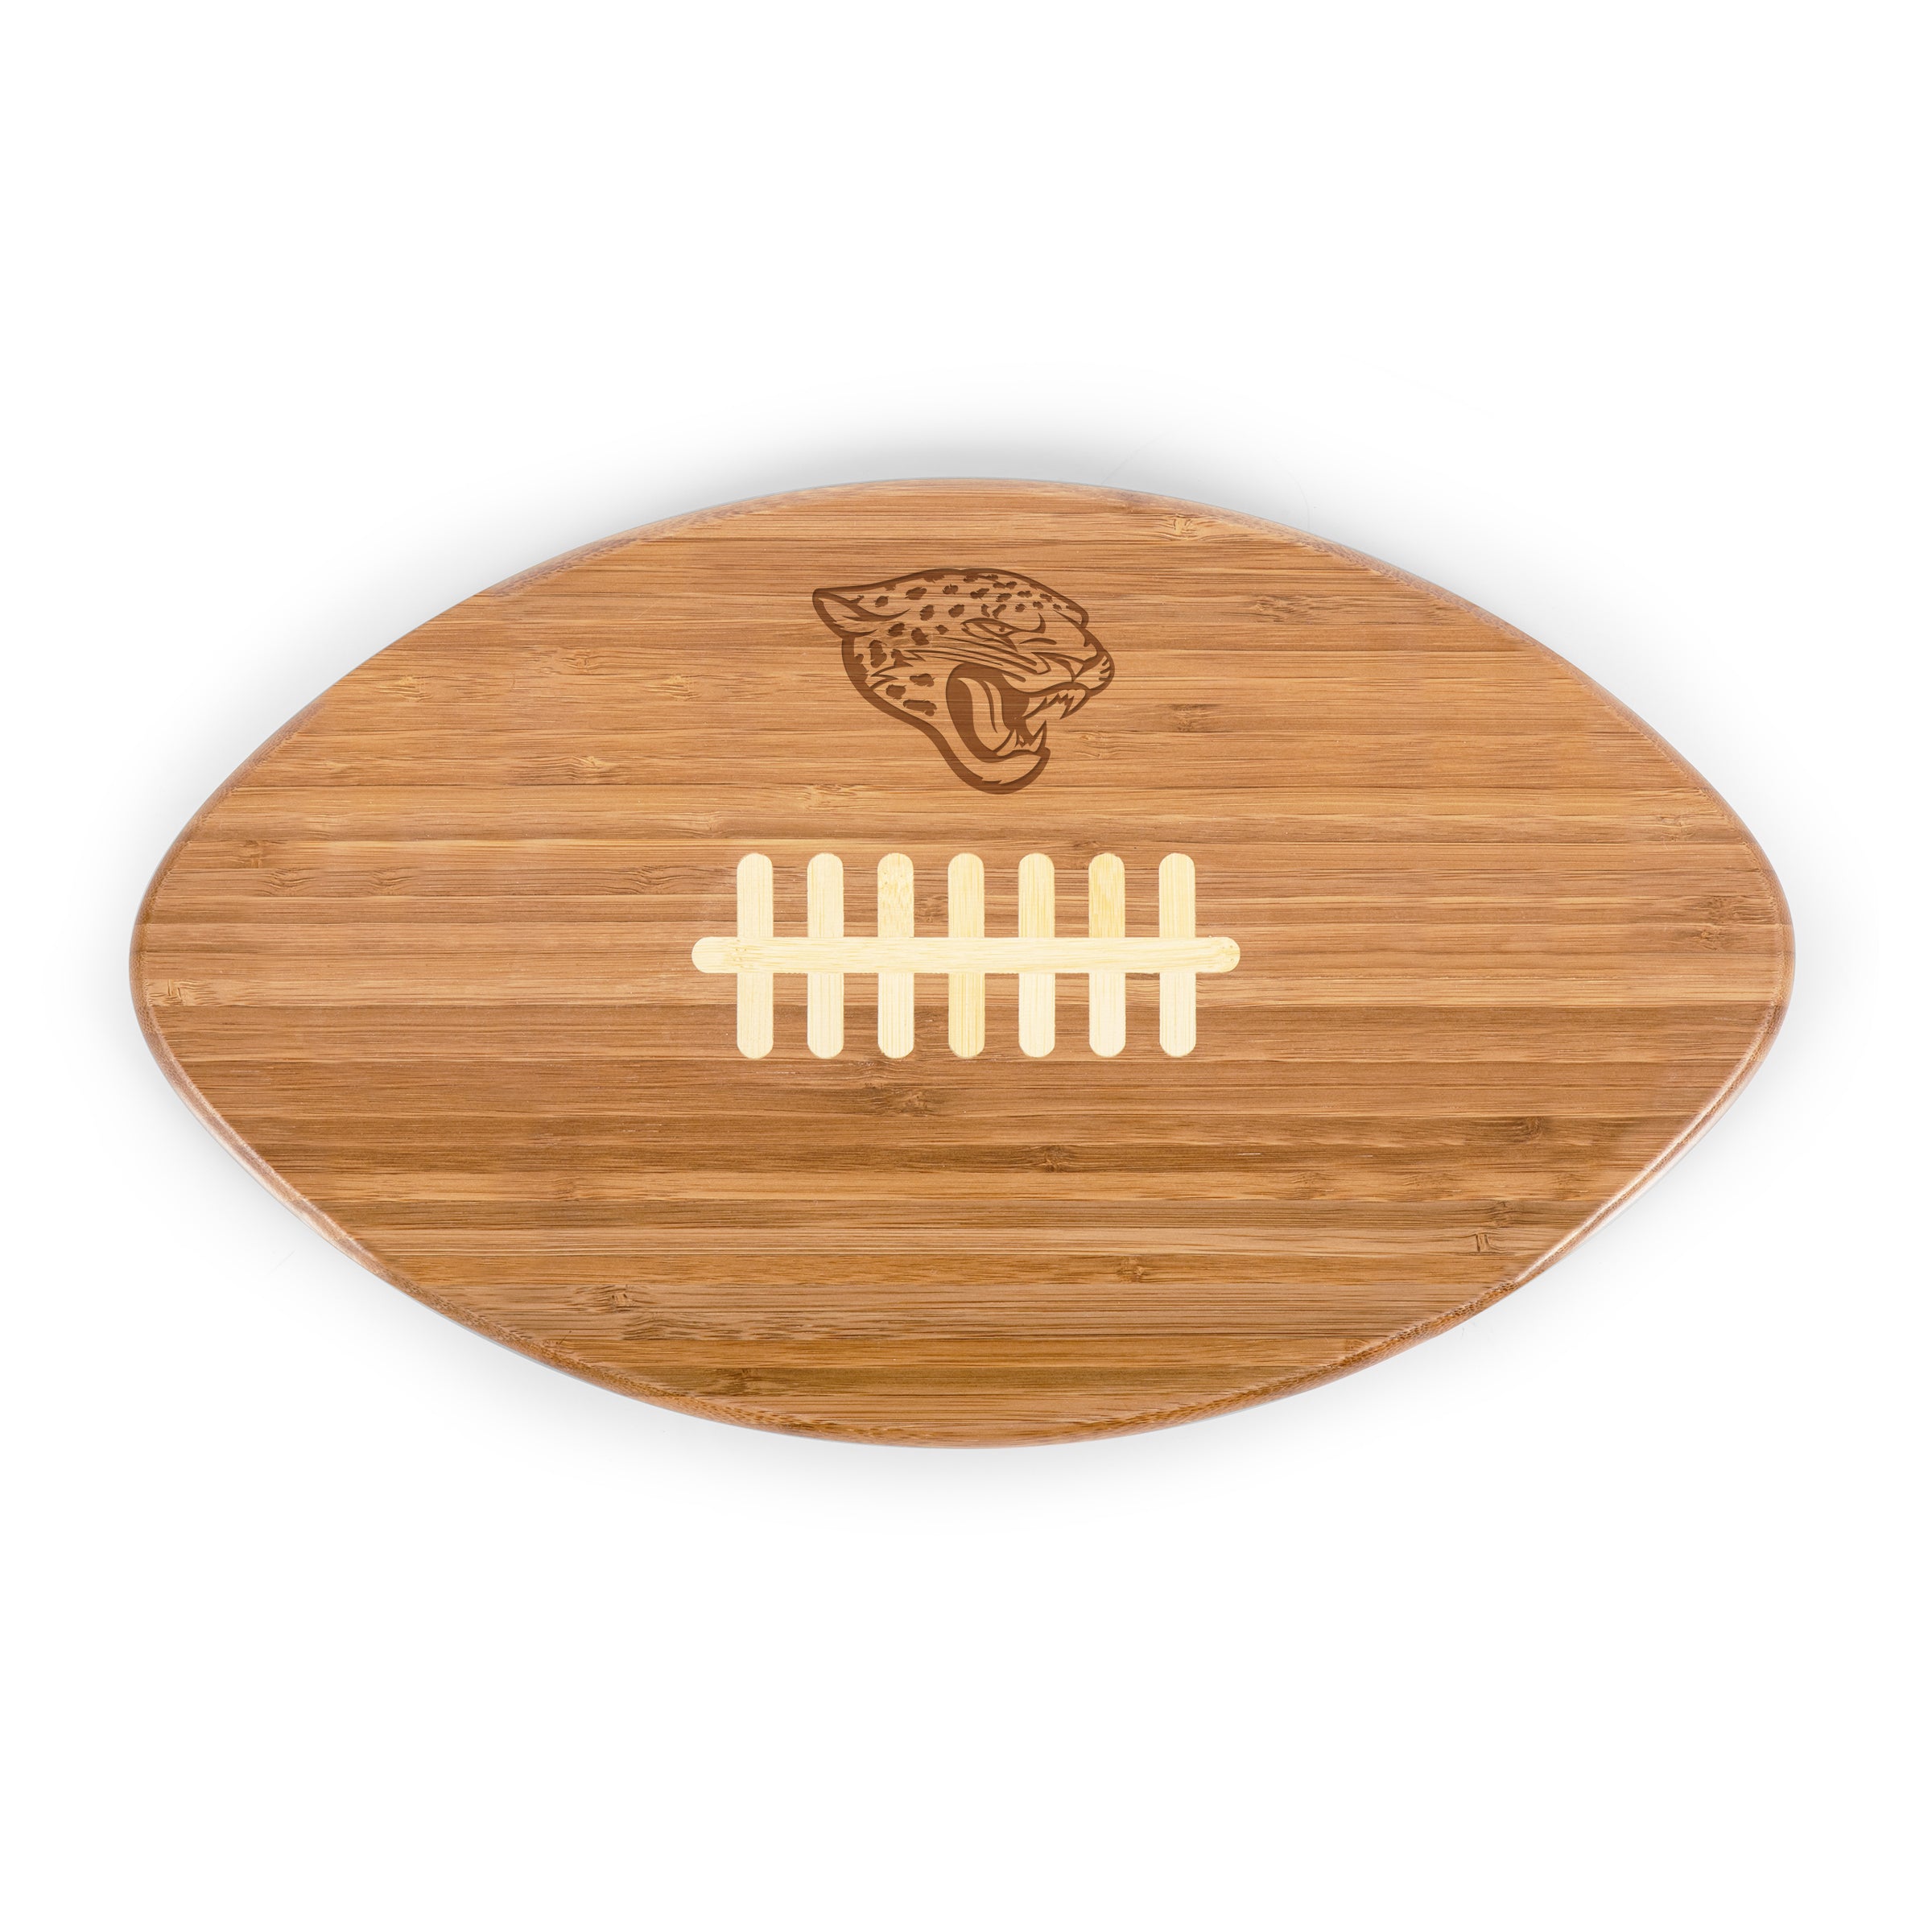 Jacksonville Jaguars - Touchdown! Football Cutting Board & Serving Tray